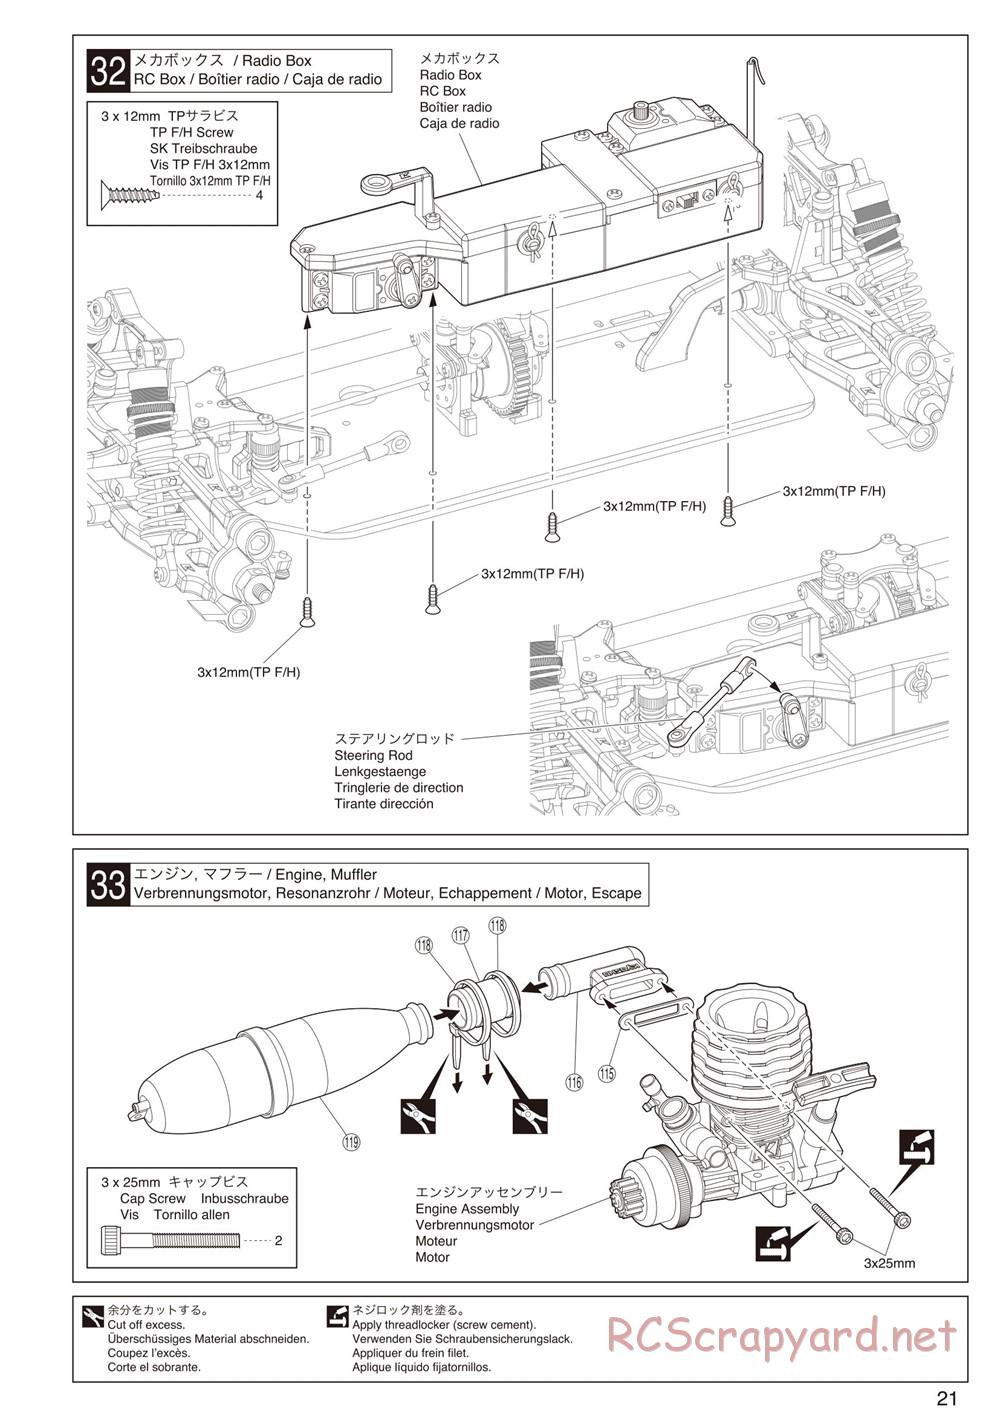 Kyosho - DRX - Manual - Page 21